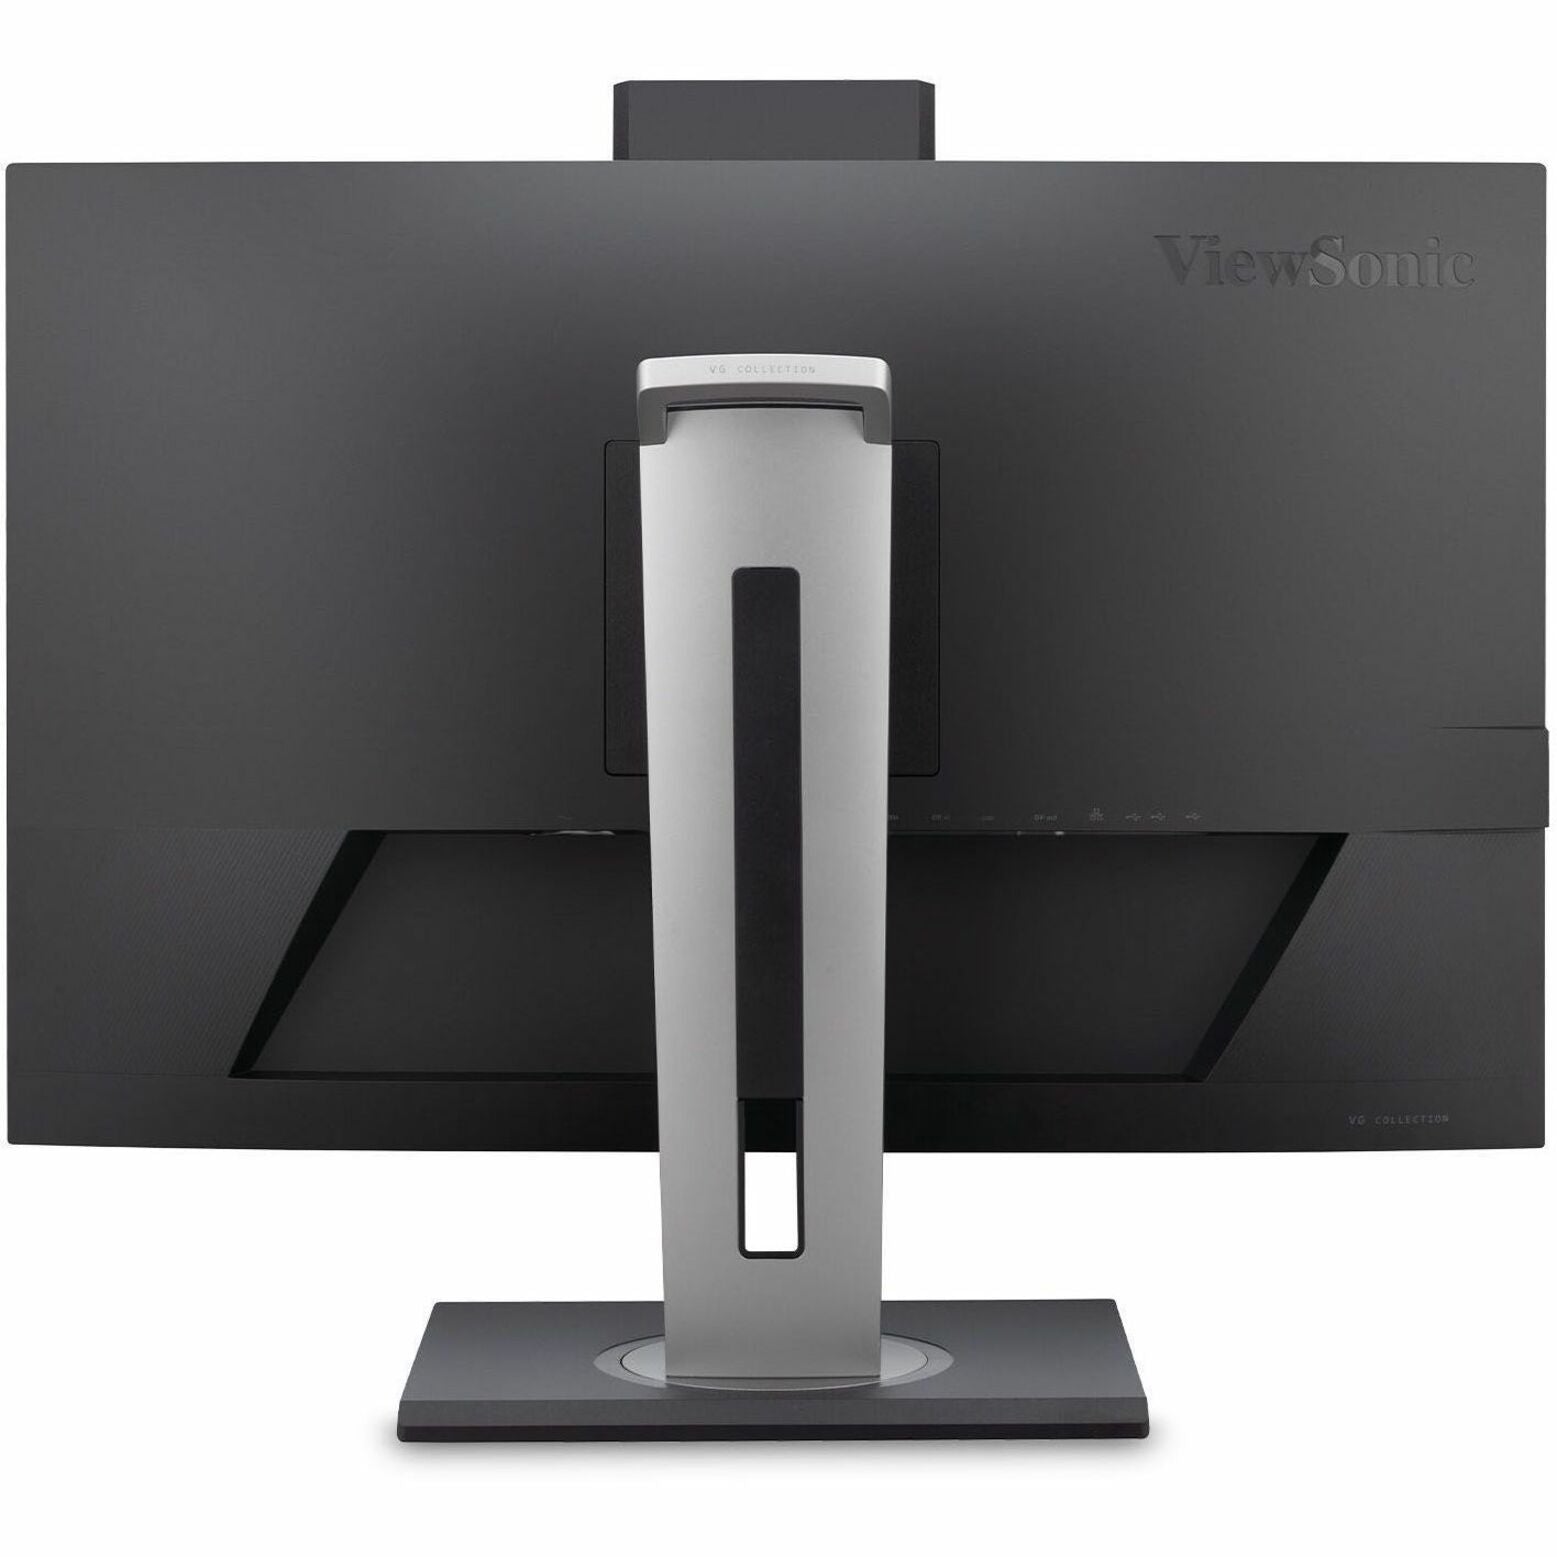 ViewSonic 27IN 1440P VIDEO CONFERENCING MONITOR WITH WINDOWS HELLO COMPATIBLE IR WEBCAM, 9 (VG2757V-2K)